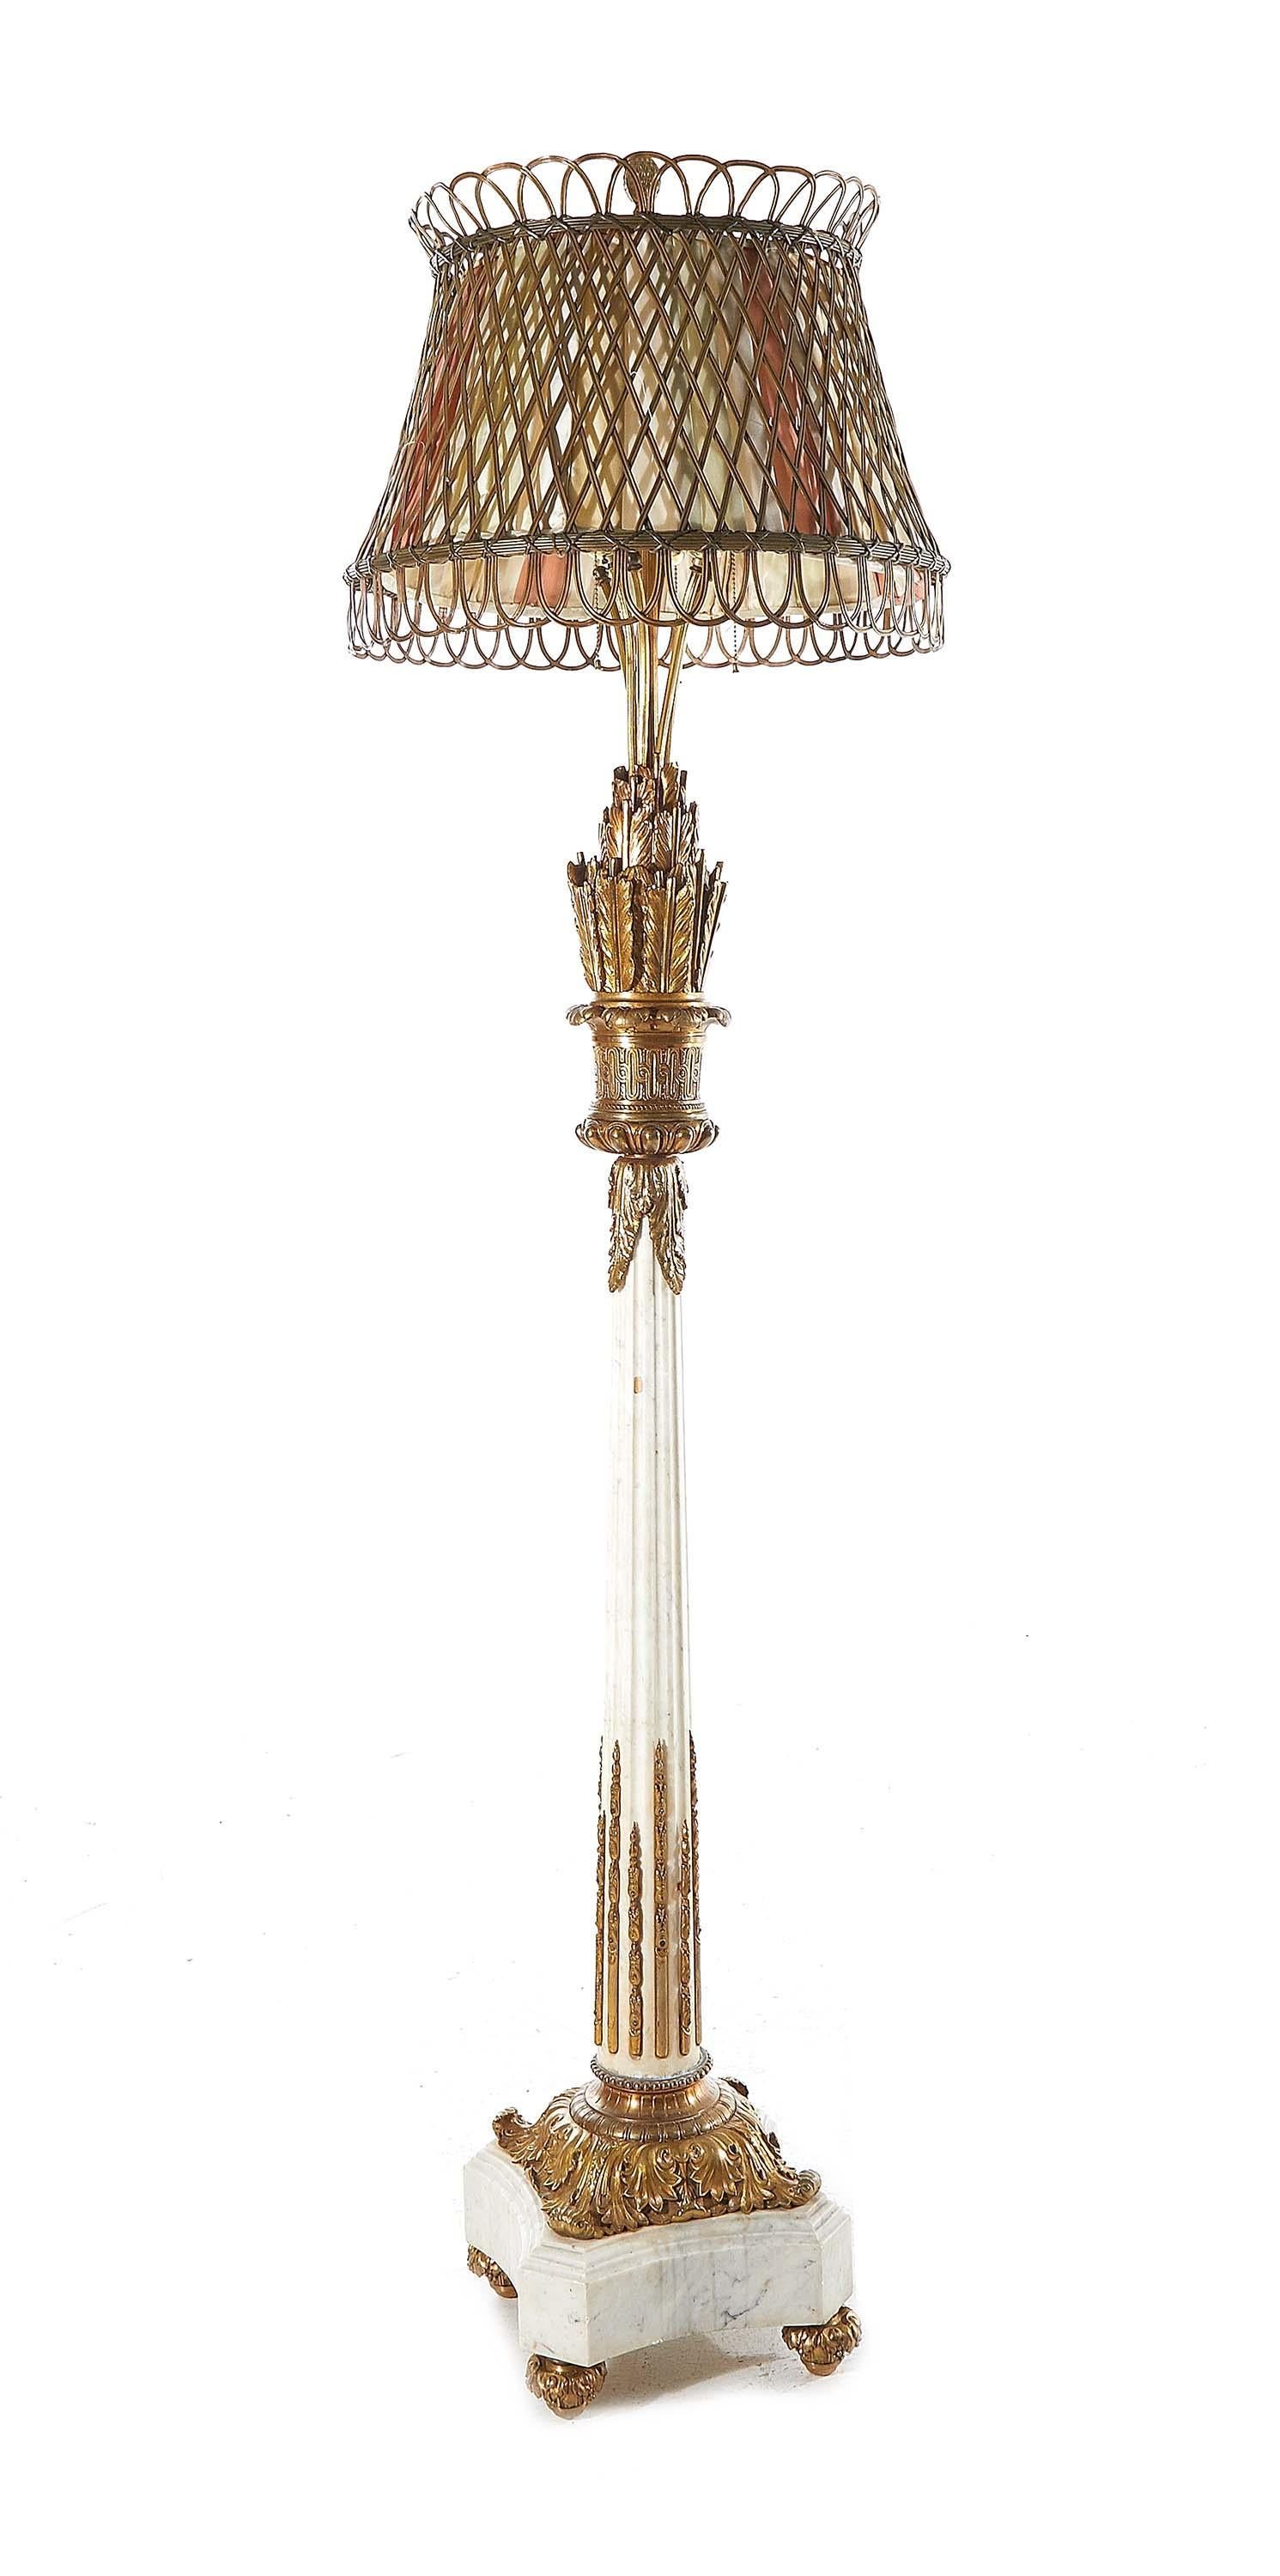 Impressive Louis XVI style gilt-bronze and marble floor lamp openwork bronze shade with fabric lining; supported by stem with quill and arrow, fluted column and quatrefoil plinth, with bronze mounts throughout. 
Measures: height 80